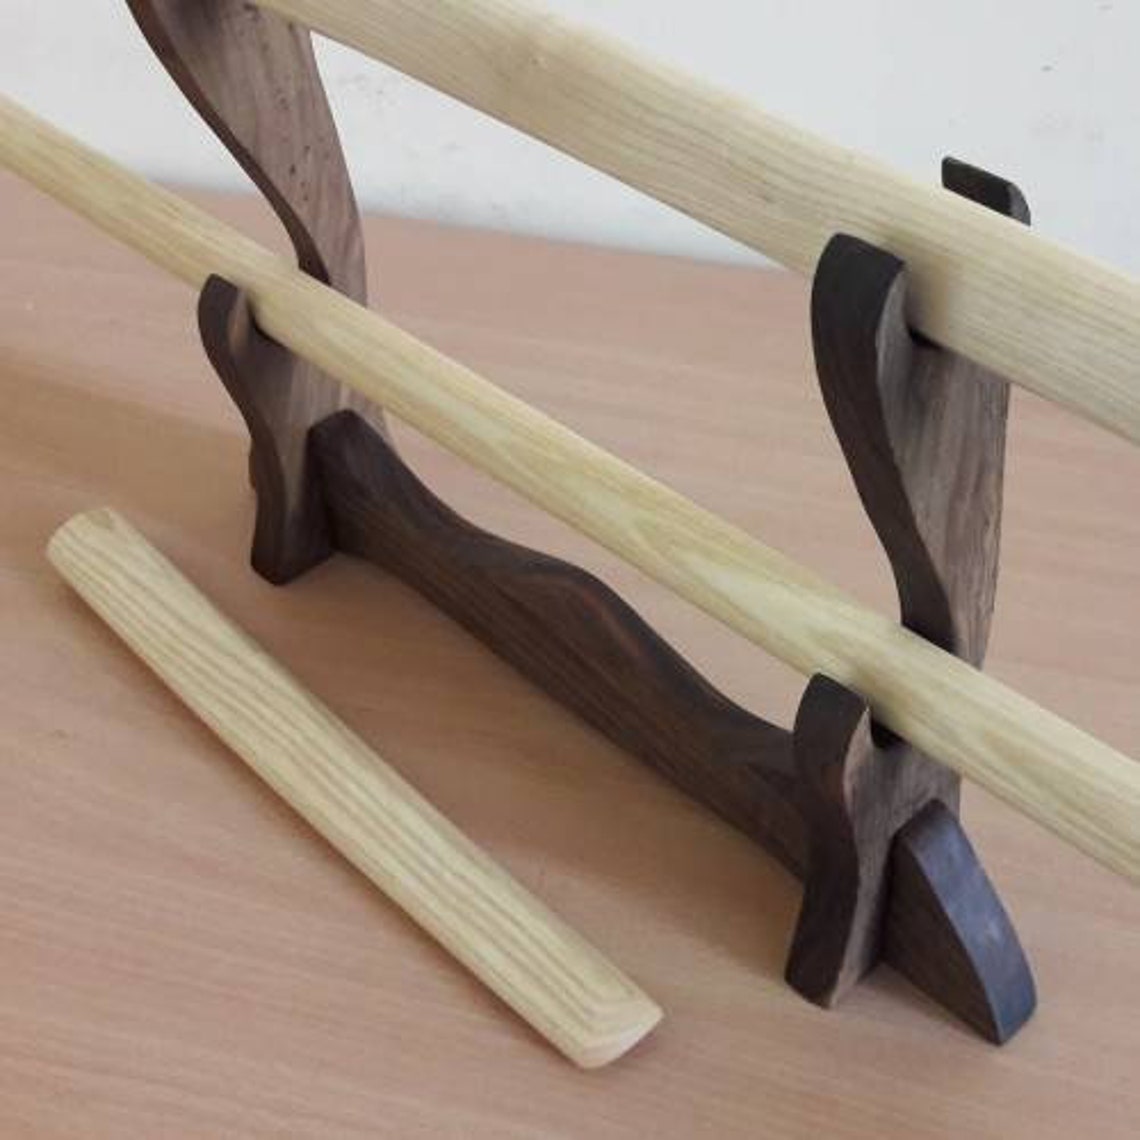 A set of wooden weapons for aikido - Bokken Daito 102 cm (40.1